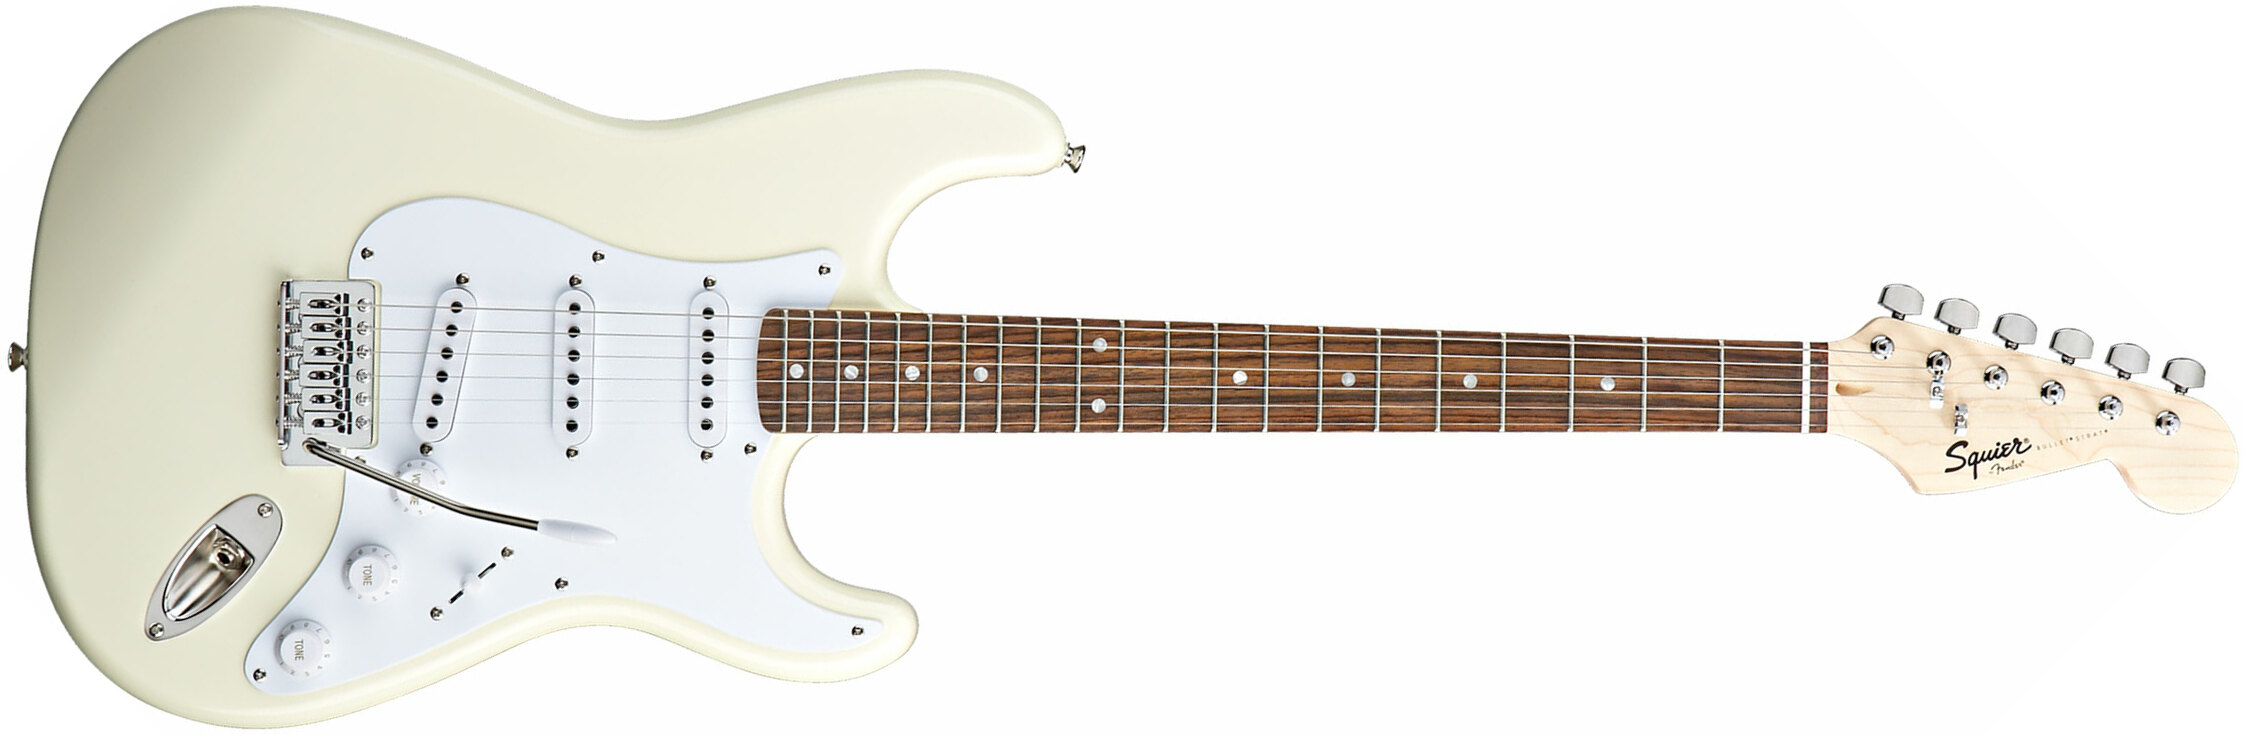 Squier Bullet Stratocaster With Tremolo Sss Lau - Arctic White - Str shape electric guitar - Main picture